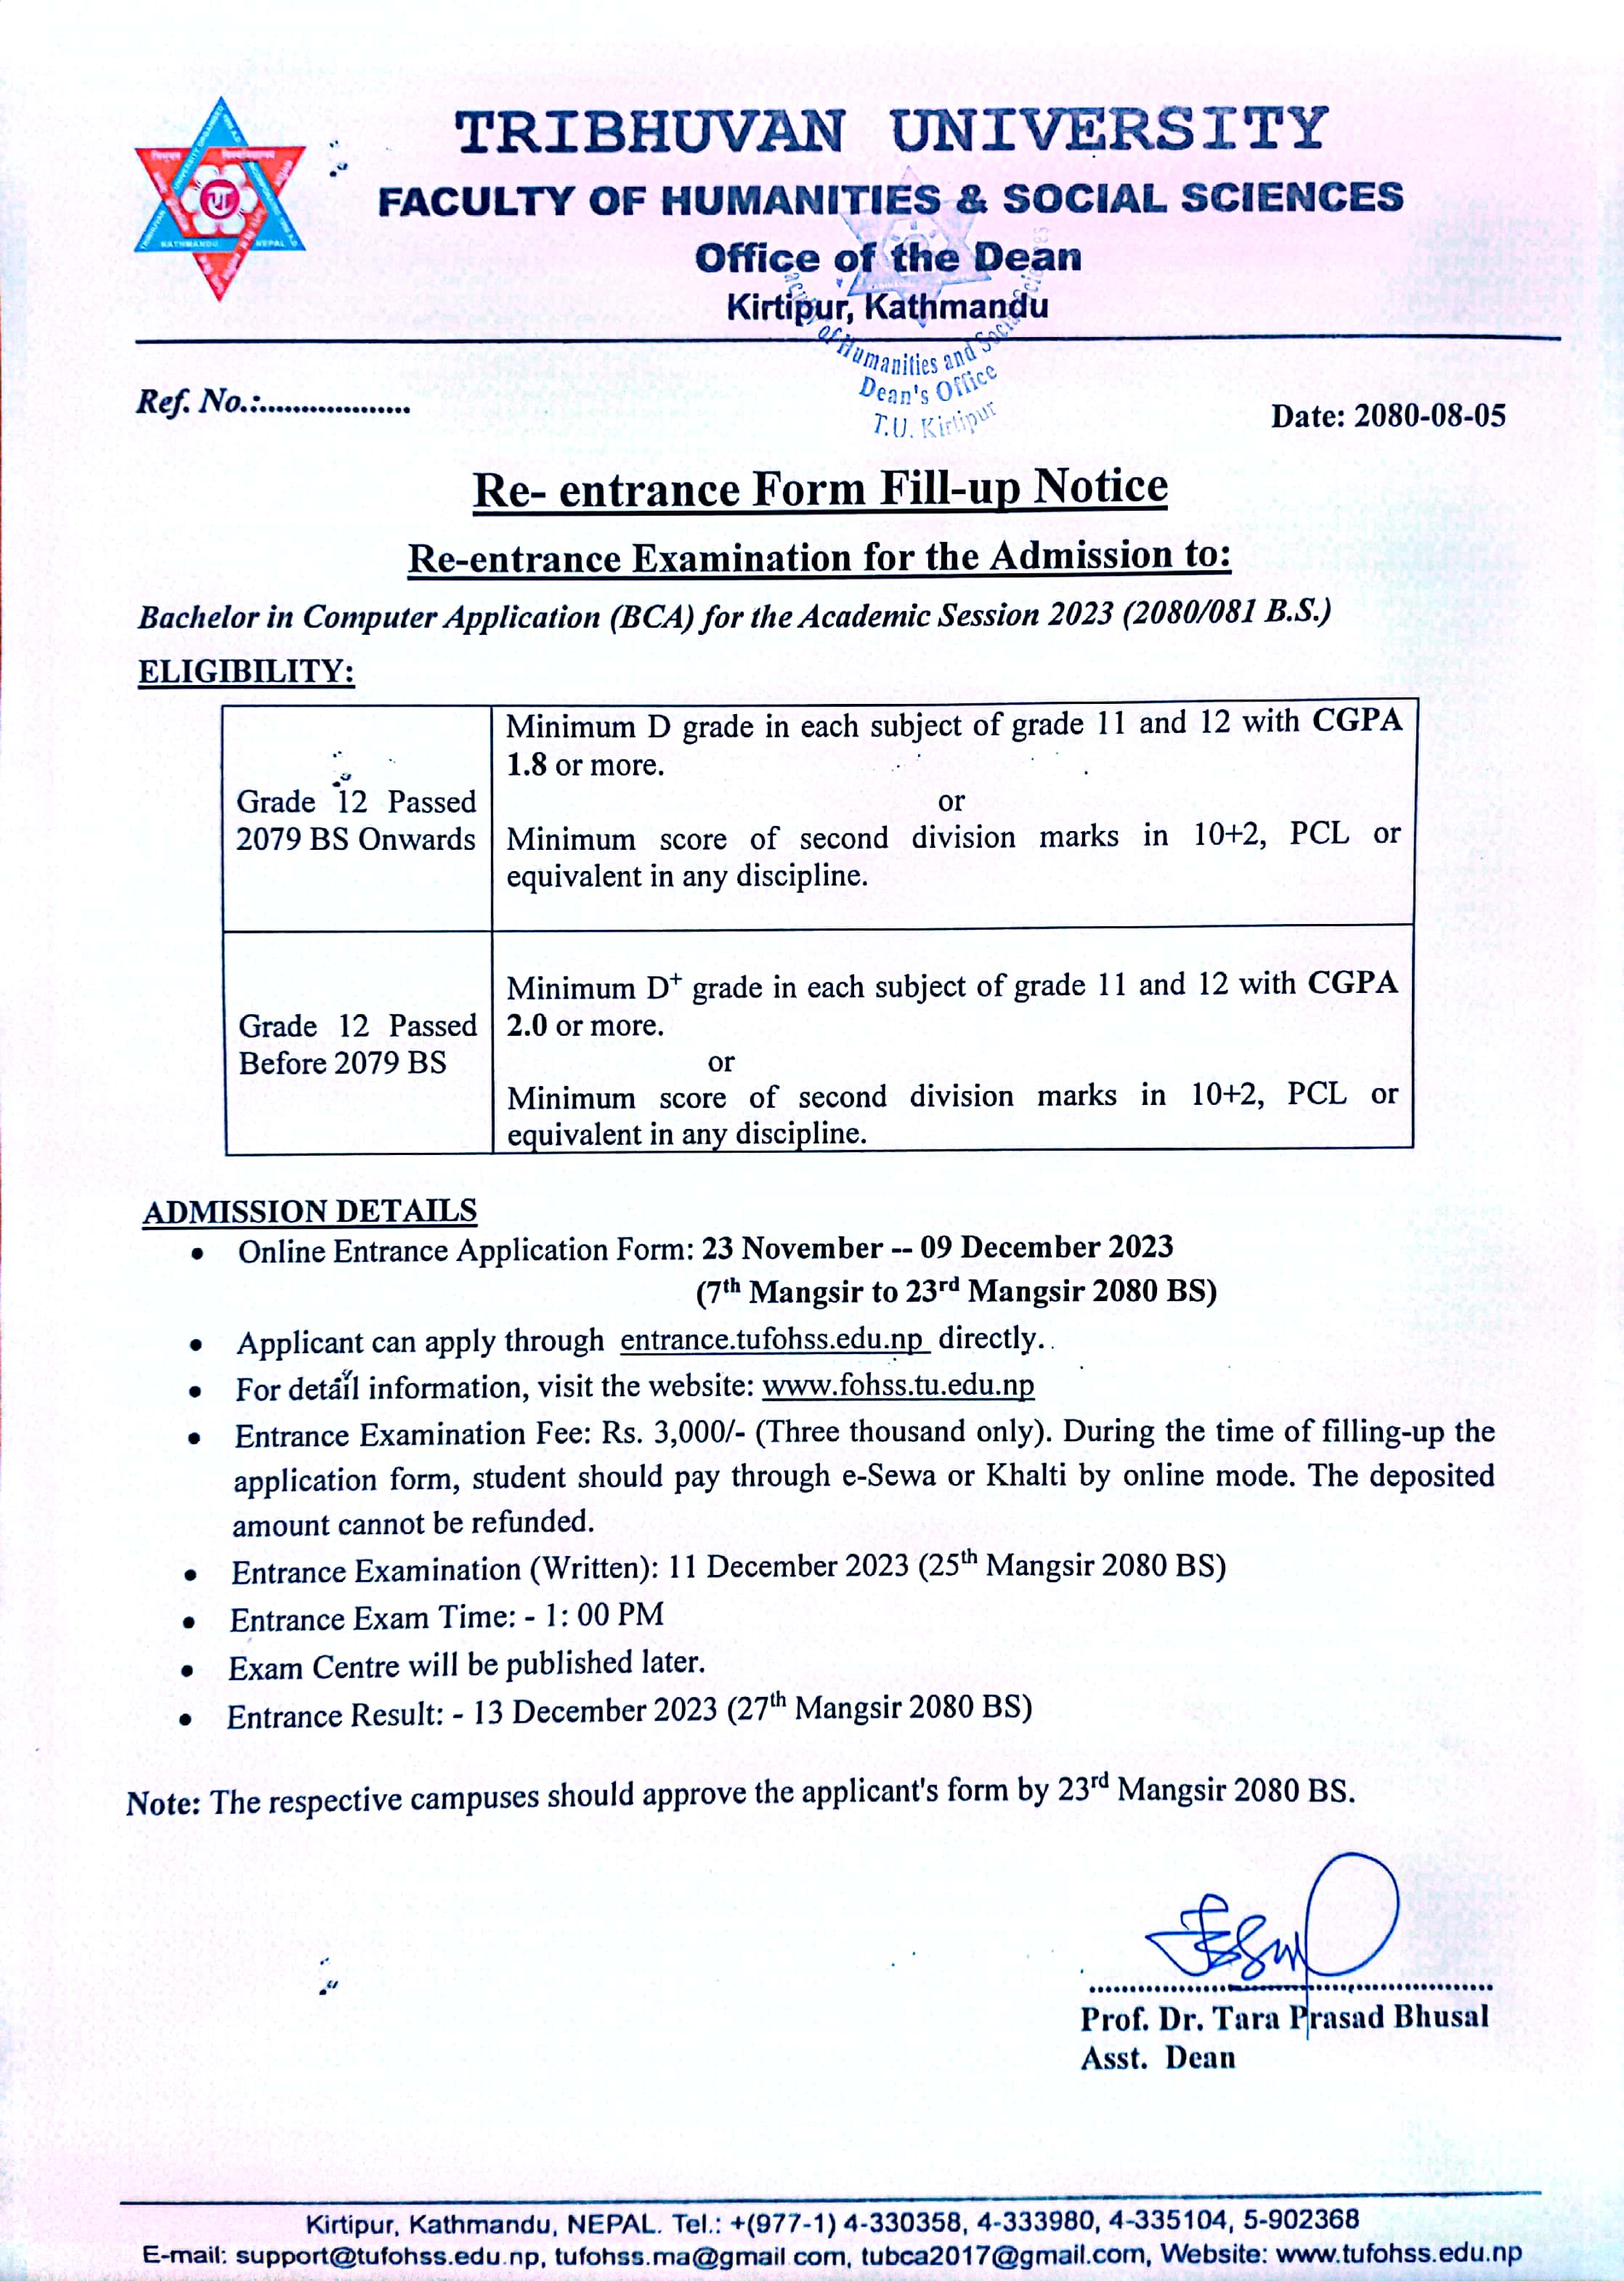 BCA Re-entrance form fill up notice for 2023 Batch